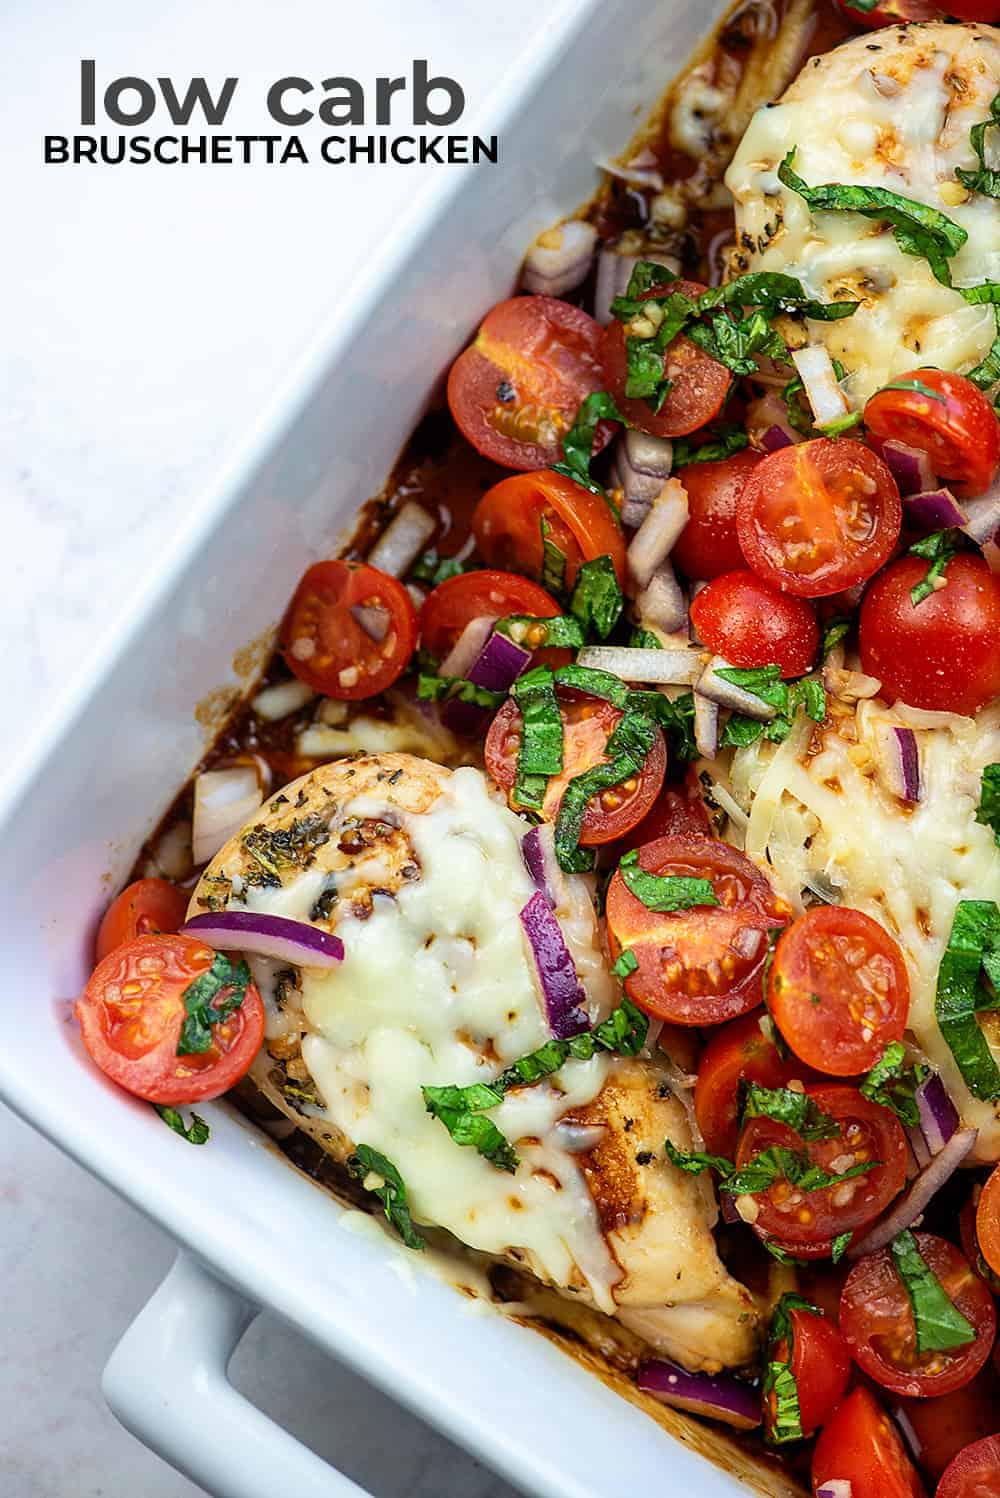  Chicken, onions, cheese, and tomatoes in a white baking dish.